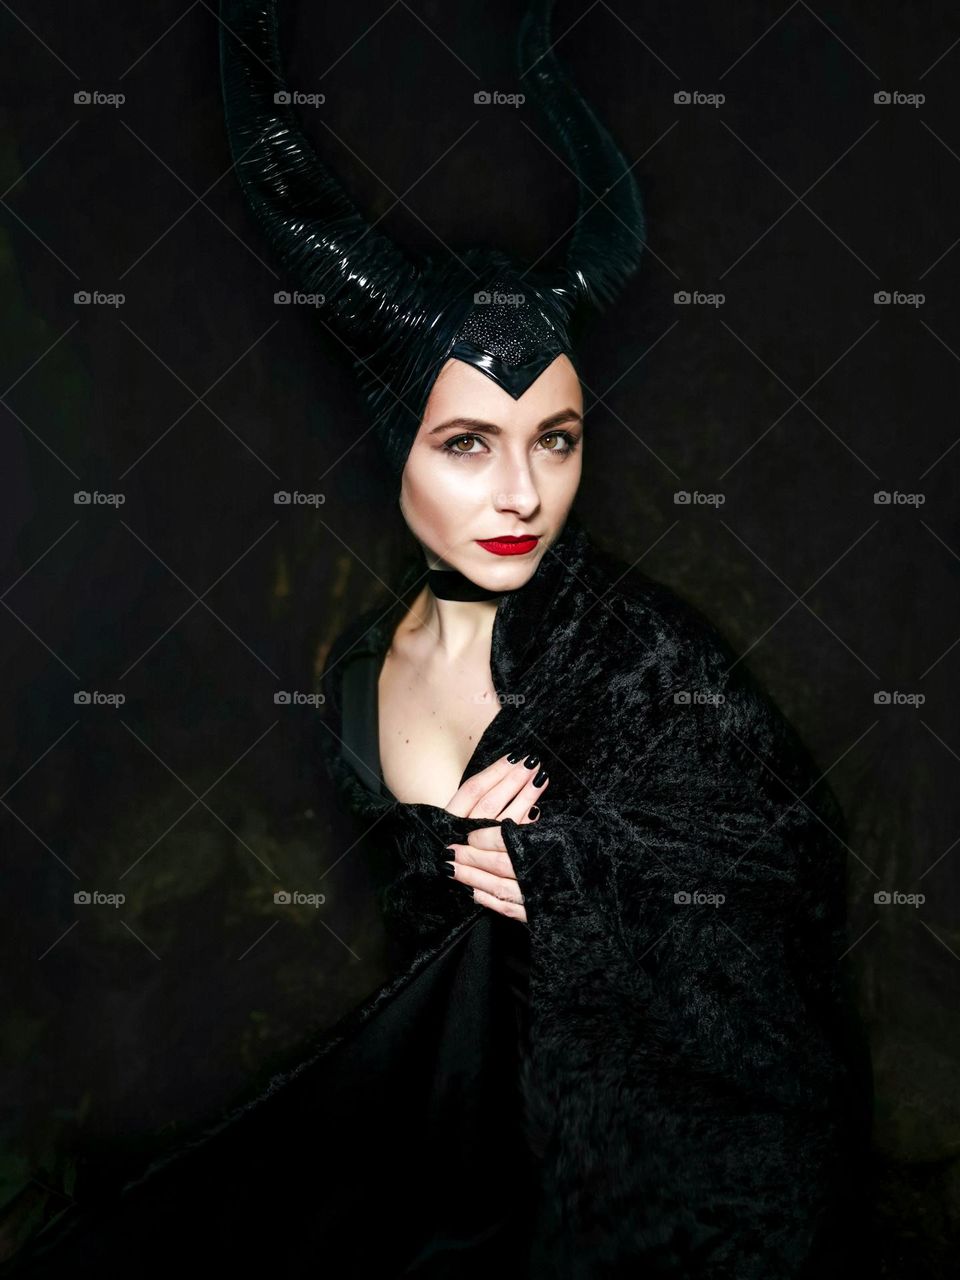 October - Halloween time. Cosplay. My beautiful model as Maleficent. The photo was taken on a smartphone Huawei mate 20 pro.